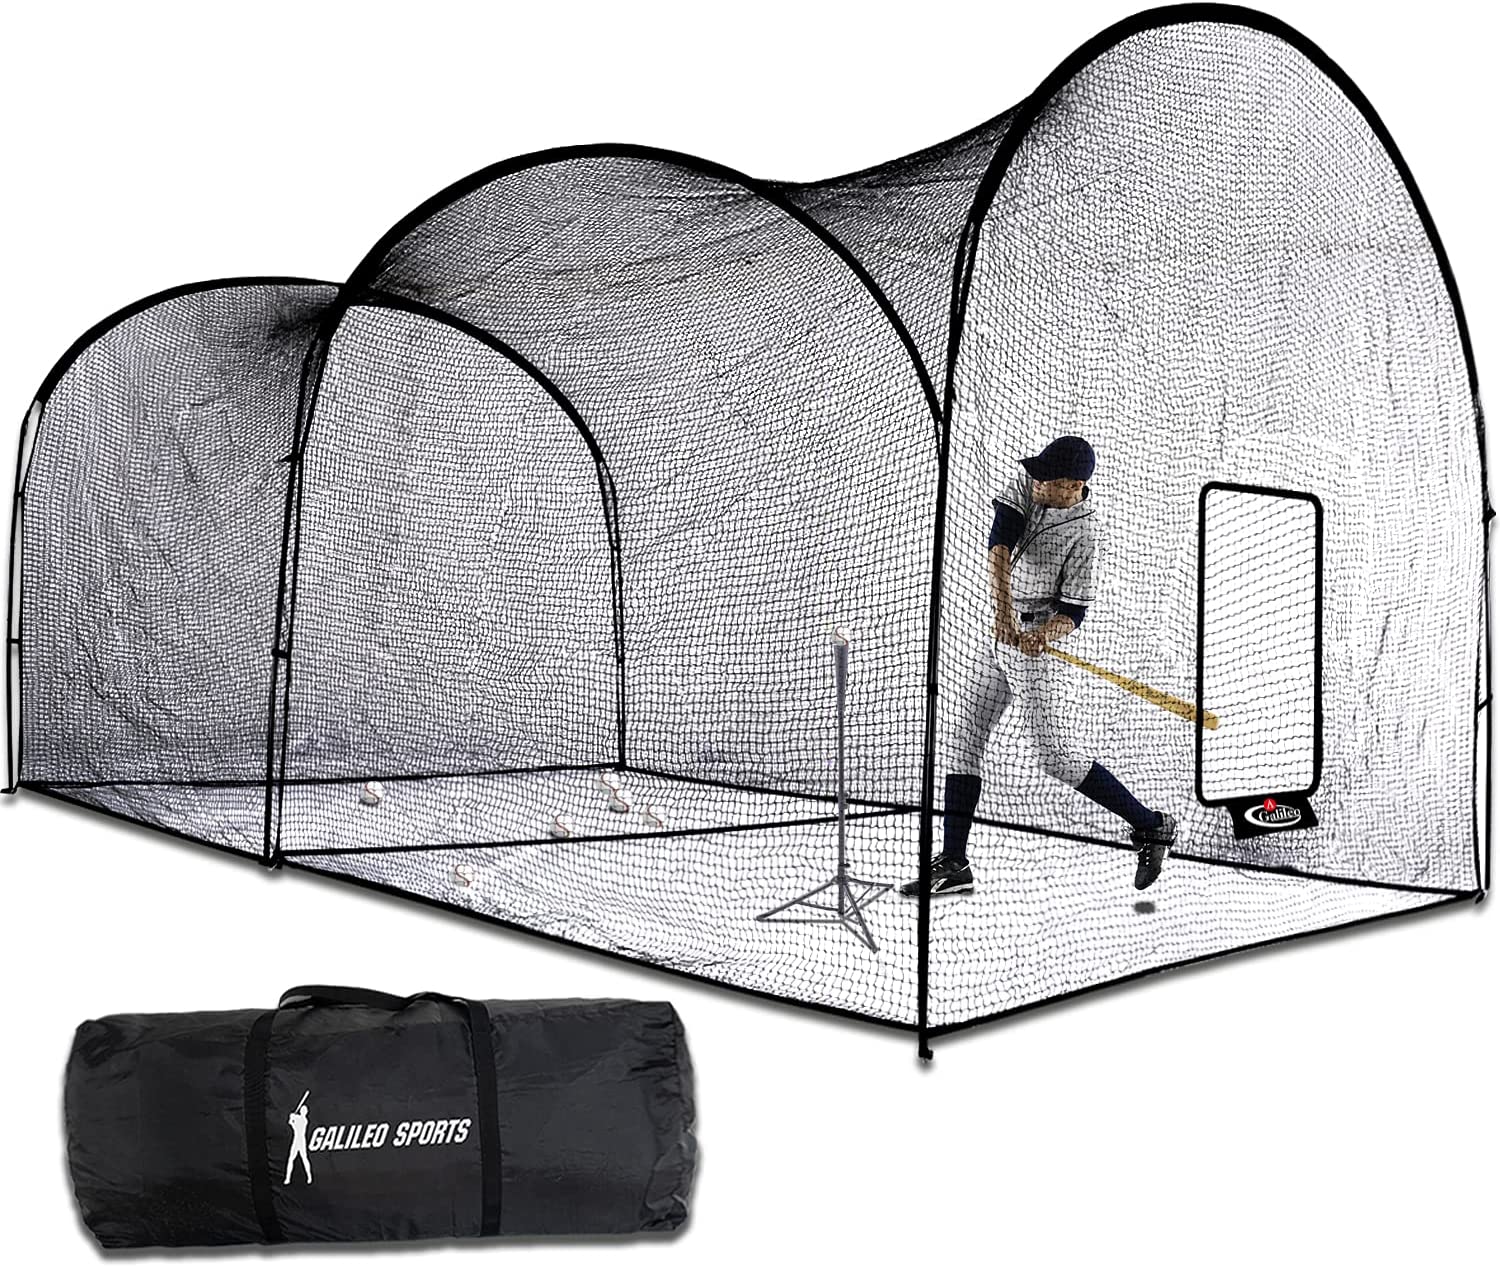 Gagalileo Batting Cage Baseball Cage Net Softball Cages, Heavy Duty Netting Backstop for Backyard, Training Softball Baseball for Pitching Pitchers 22x12x10FT